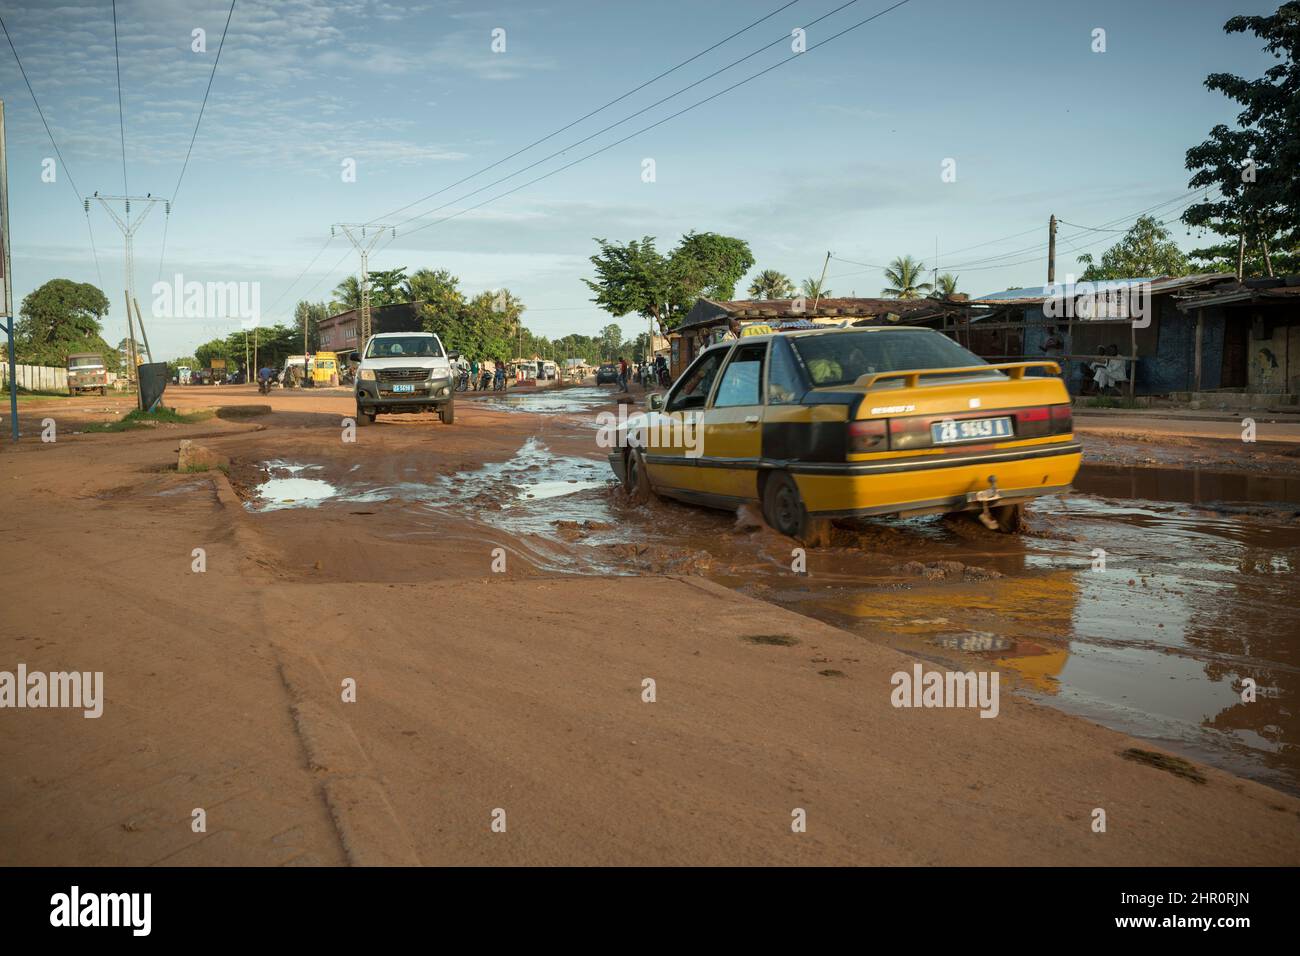 Poor road conditions of the RN6 plague the city of Ziguinchor in southern Senegal, West Africa. Stock Photo